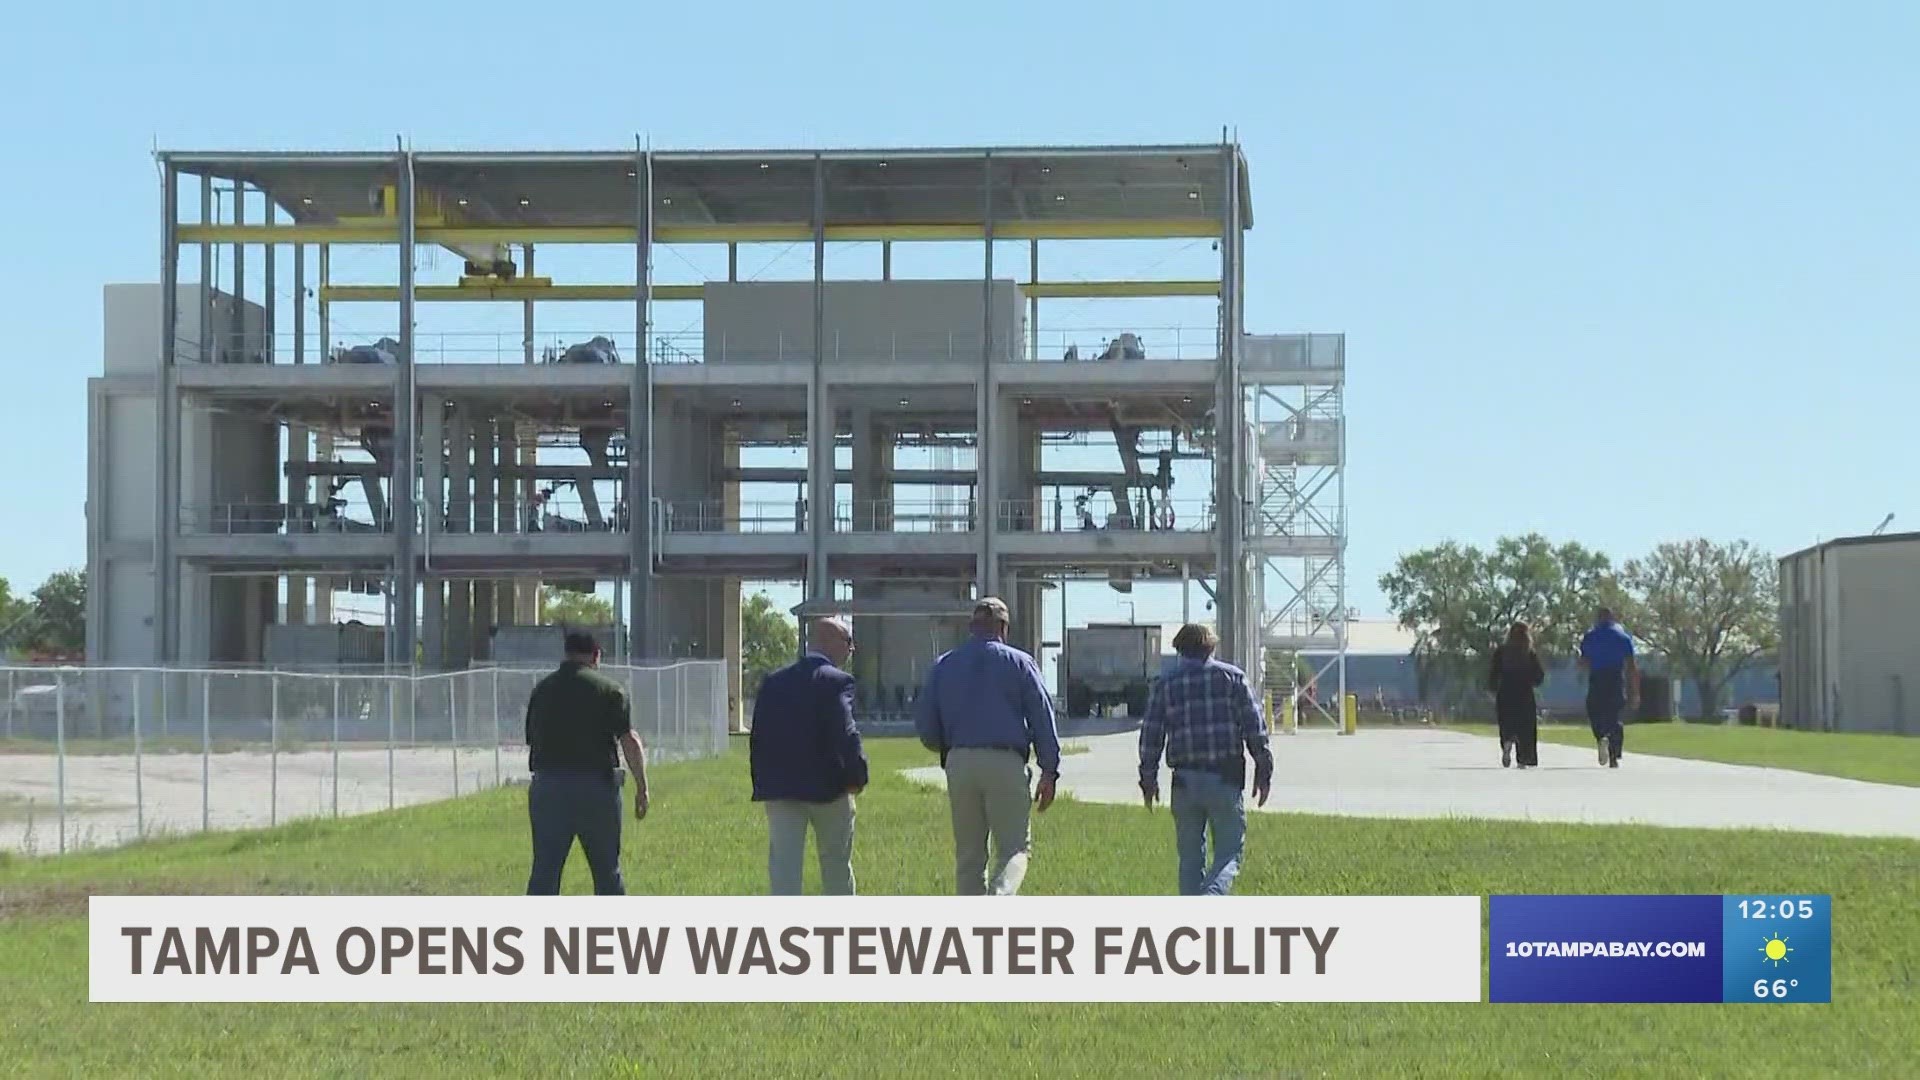 Leaders say the facility features new technology to remove more water and lower transportation funds.